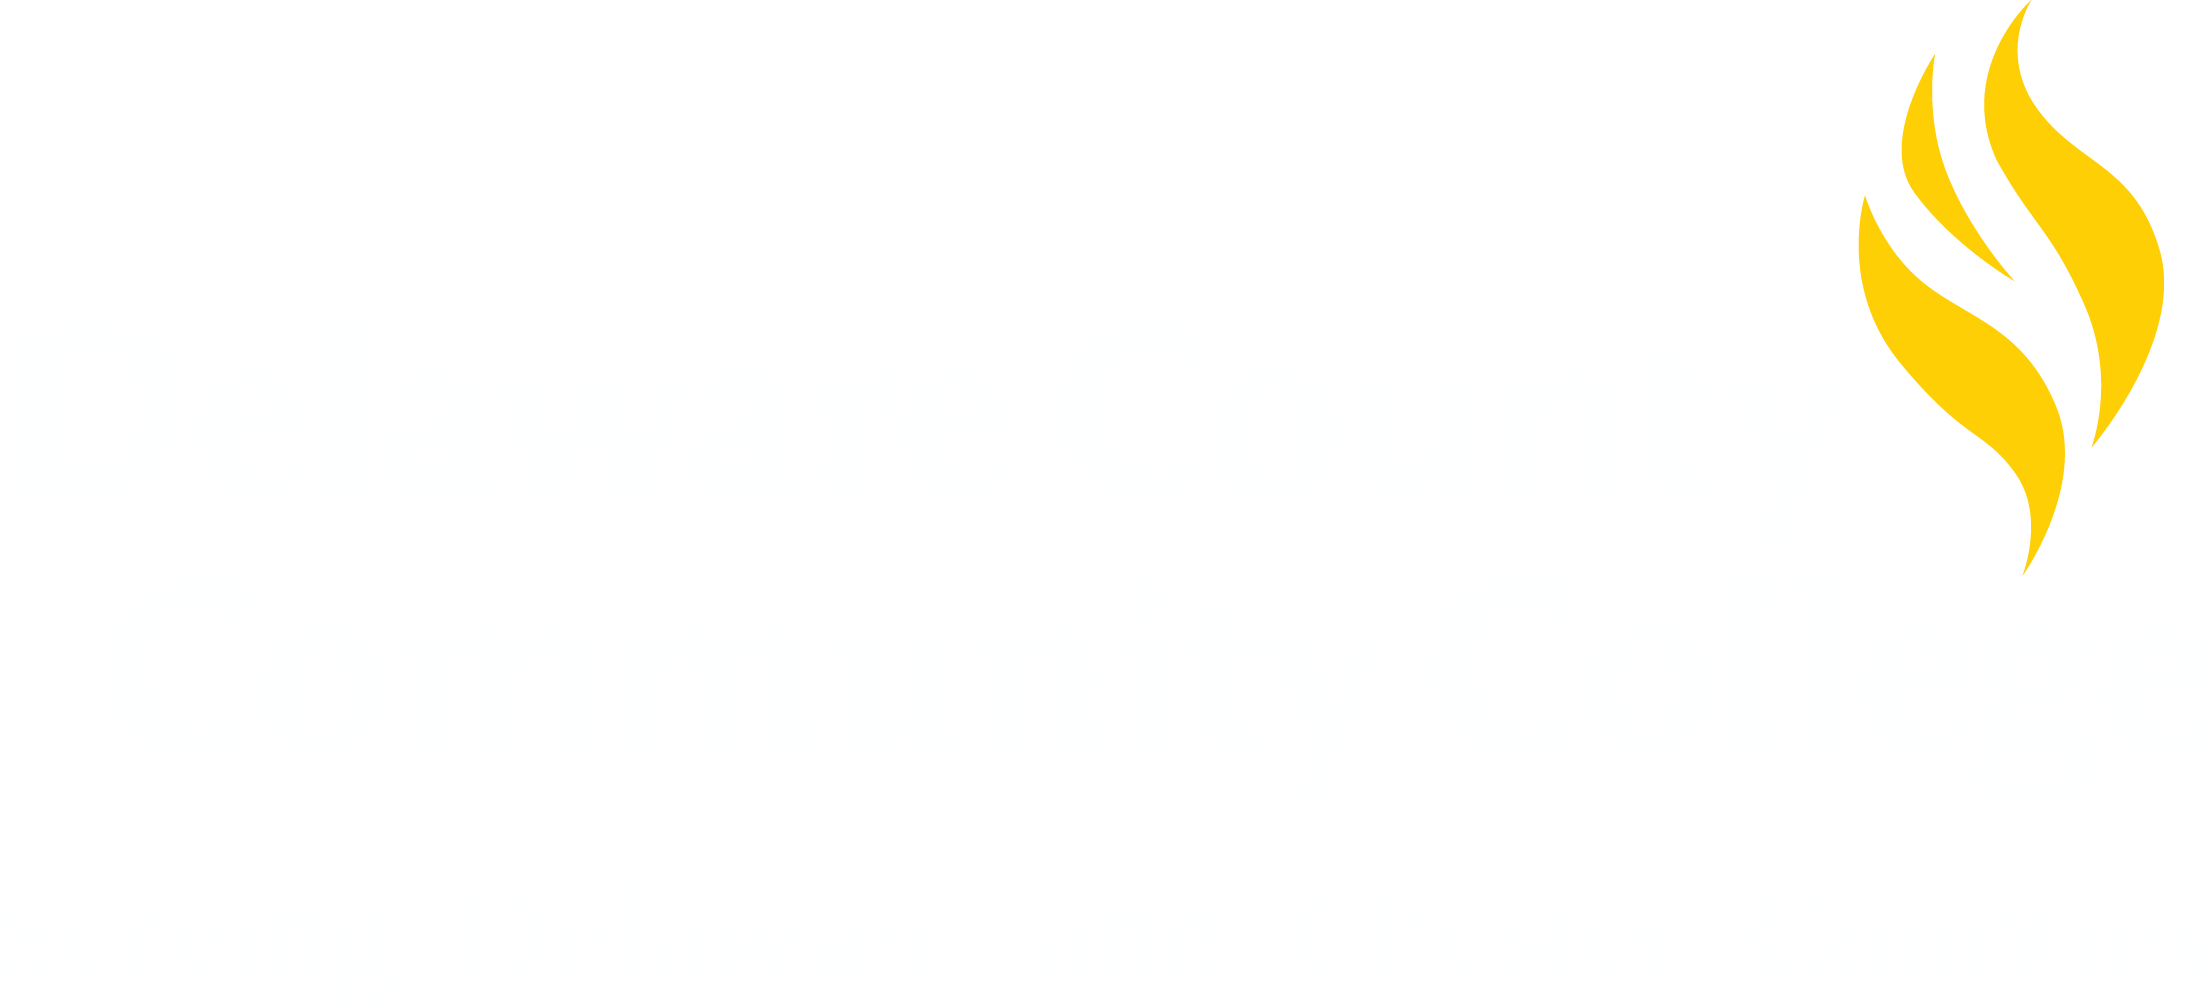 DCCC Logo - Delaware County Community College | Find yourself here. - 1